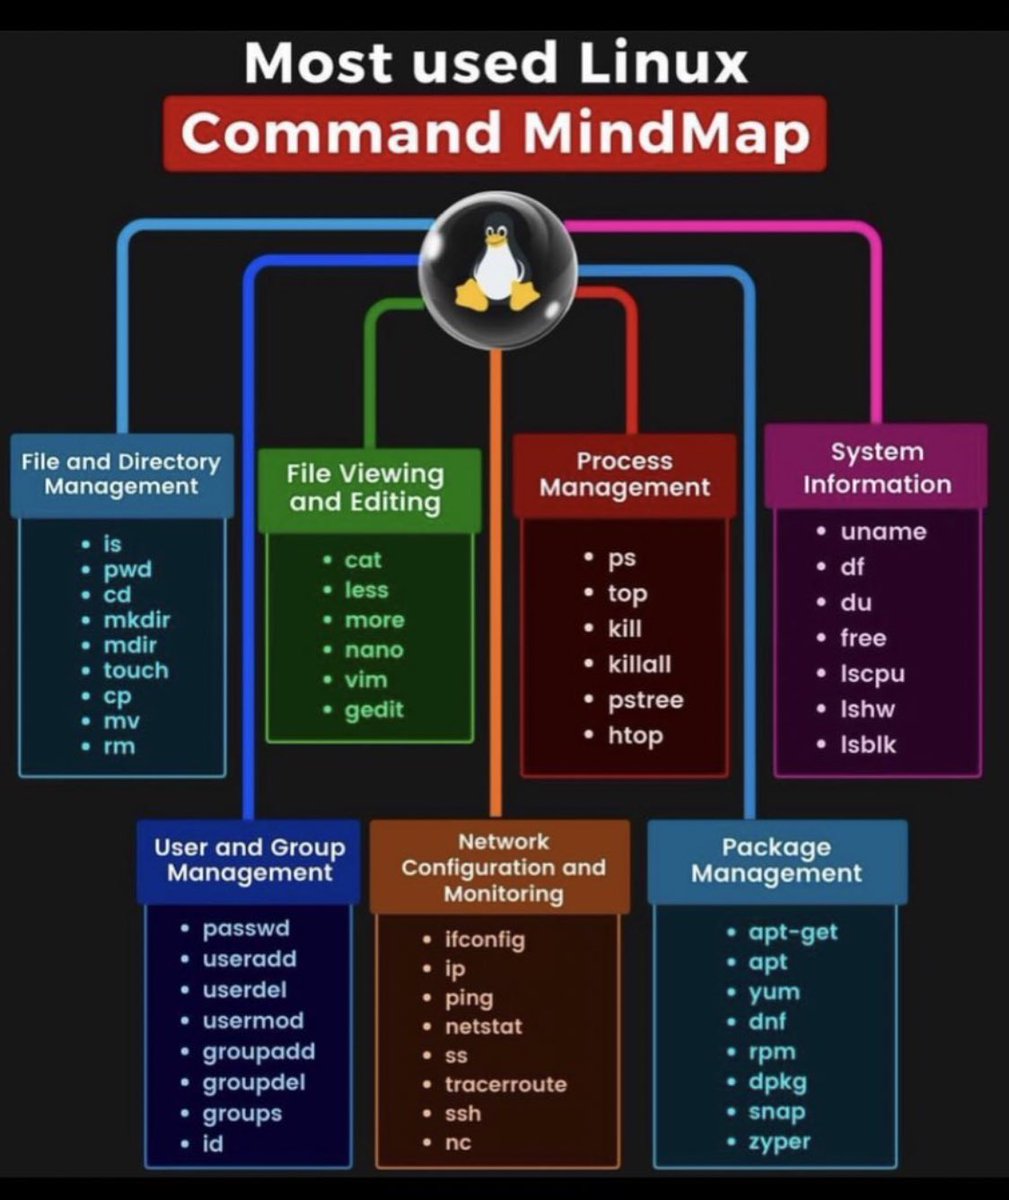 Most used Linux Command Mindmap